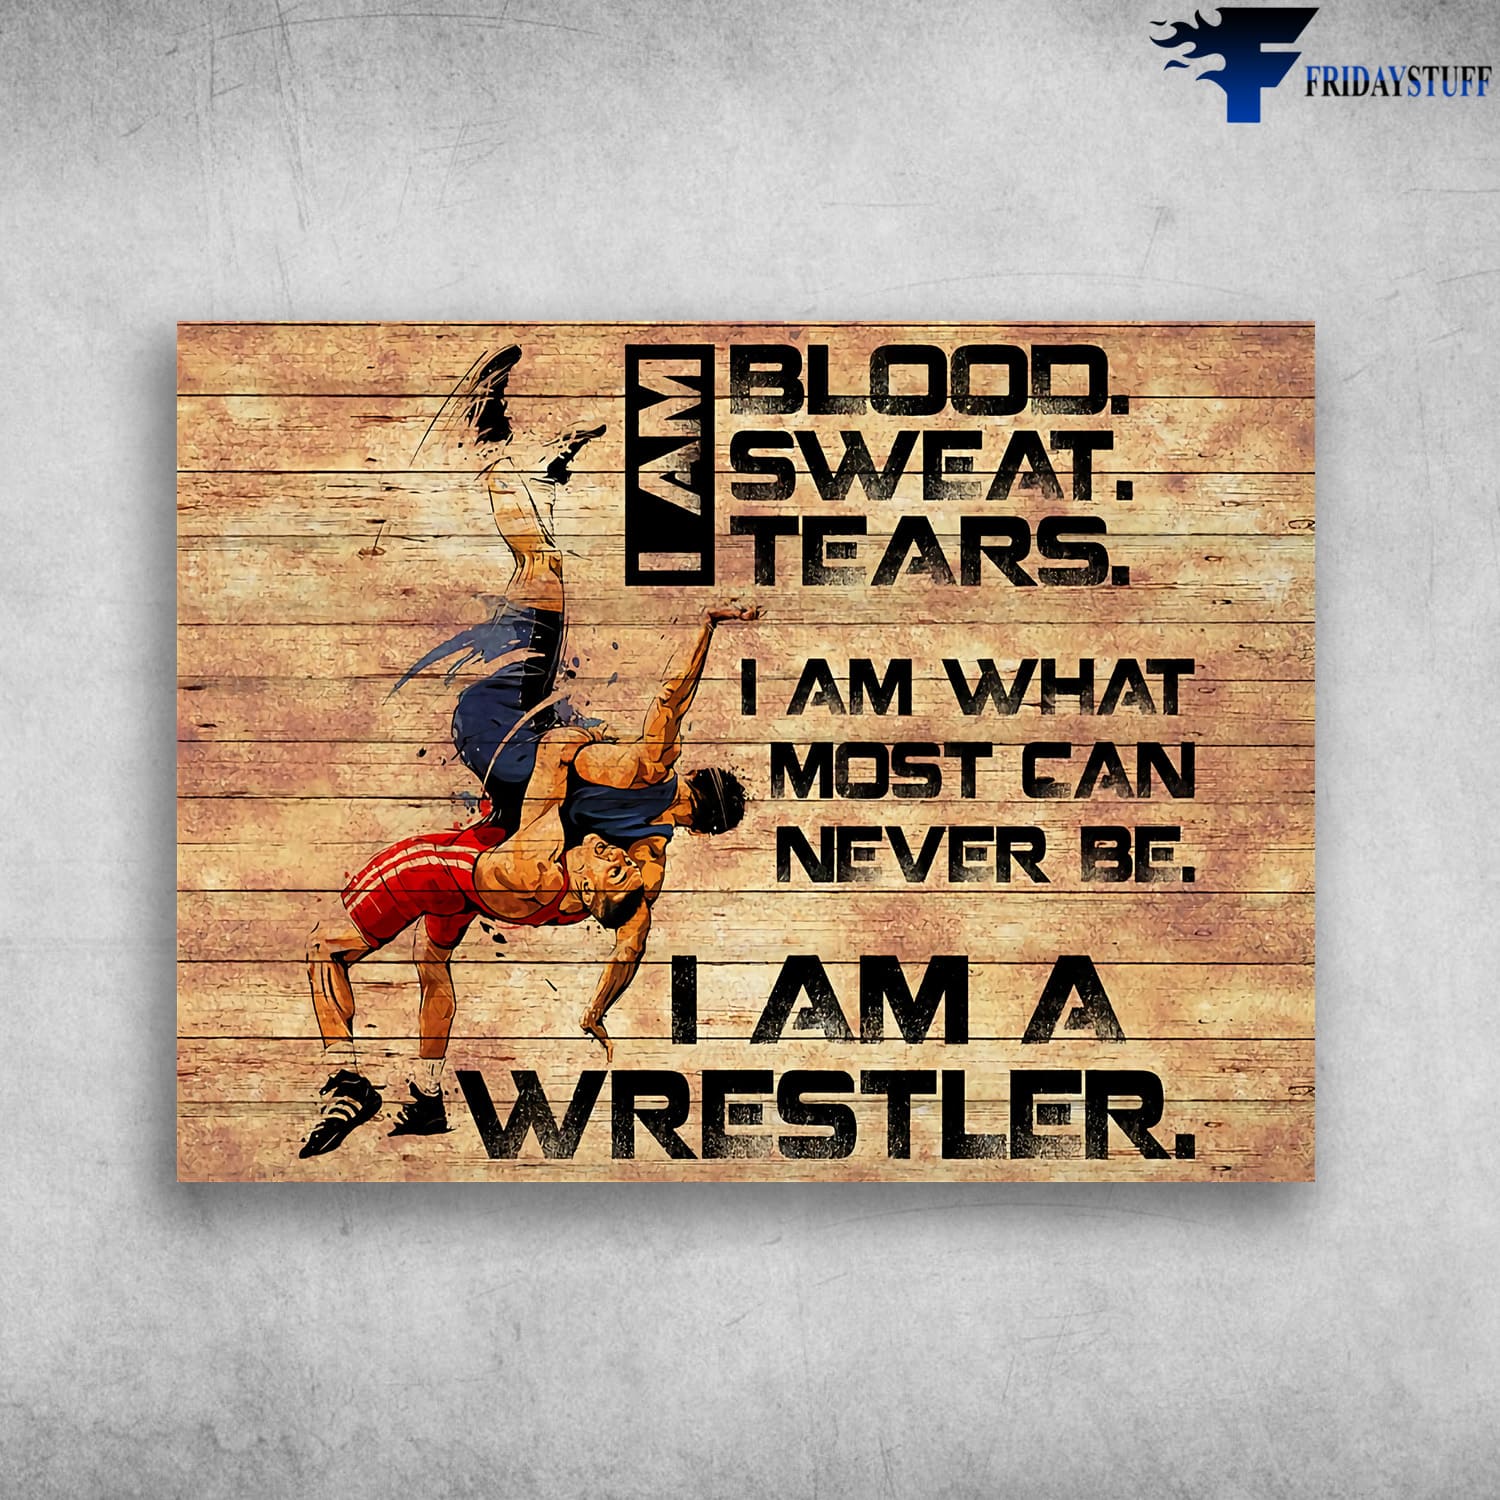 Wrestler Poster, I Am Blood, Sweat, Tears, I Am What Most Can Never Be, I Am A Wrestler